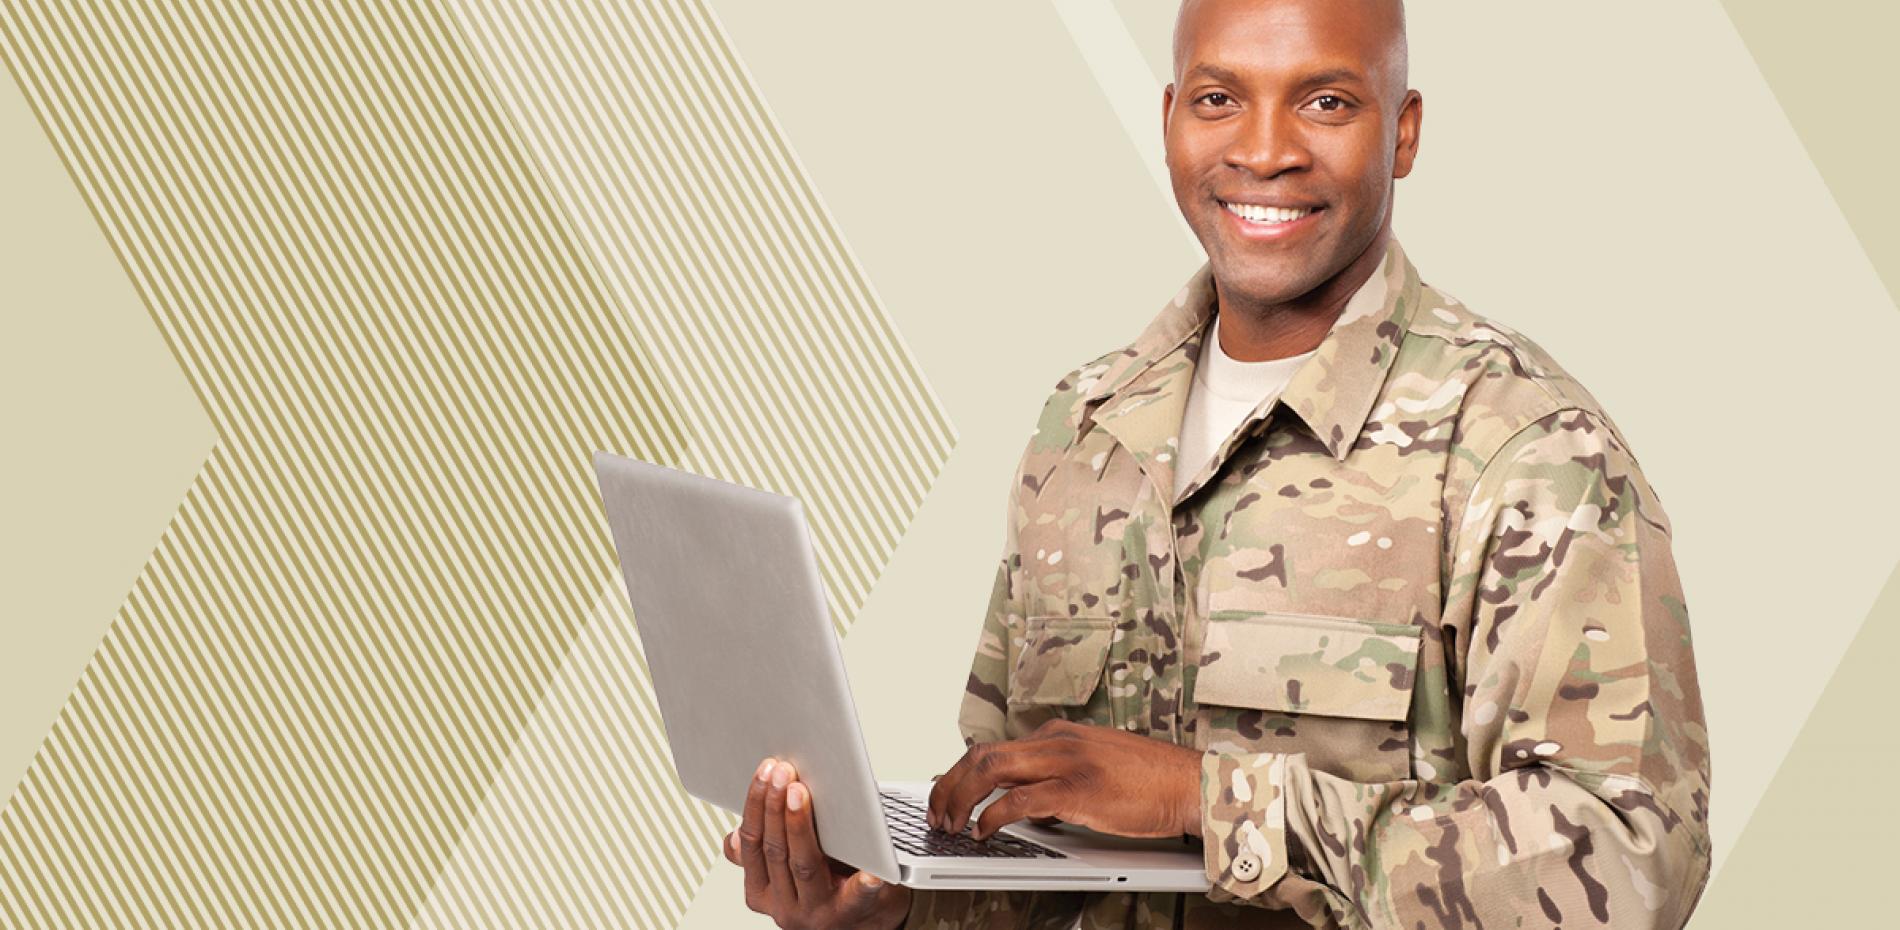 A soldier in camoflauge with a laptop